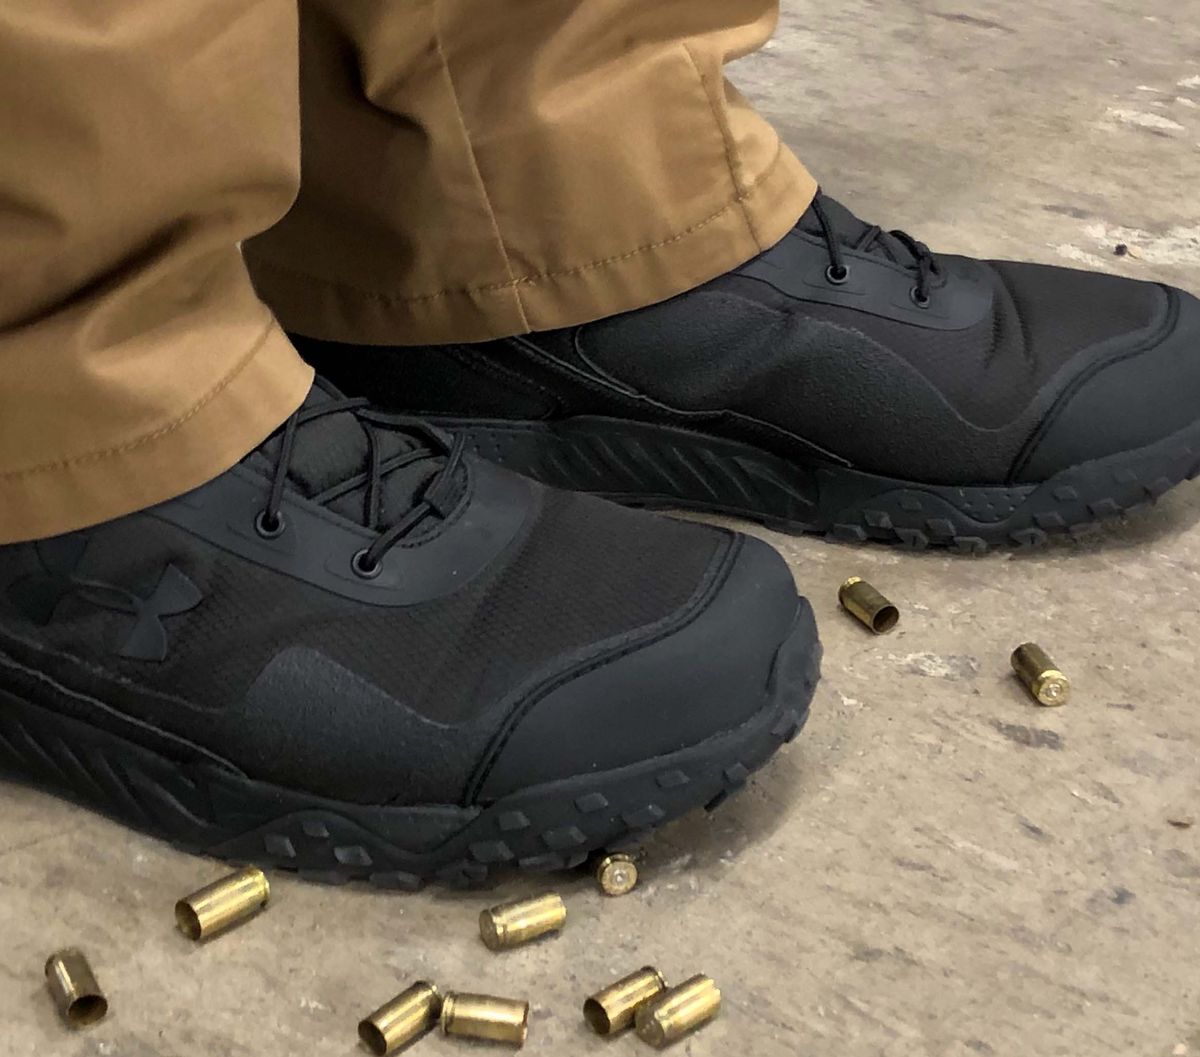 under armour police boot